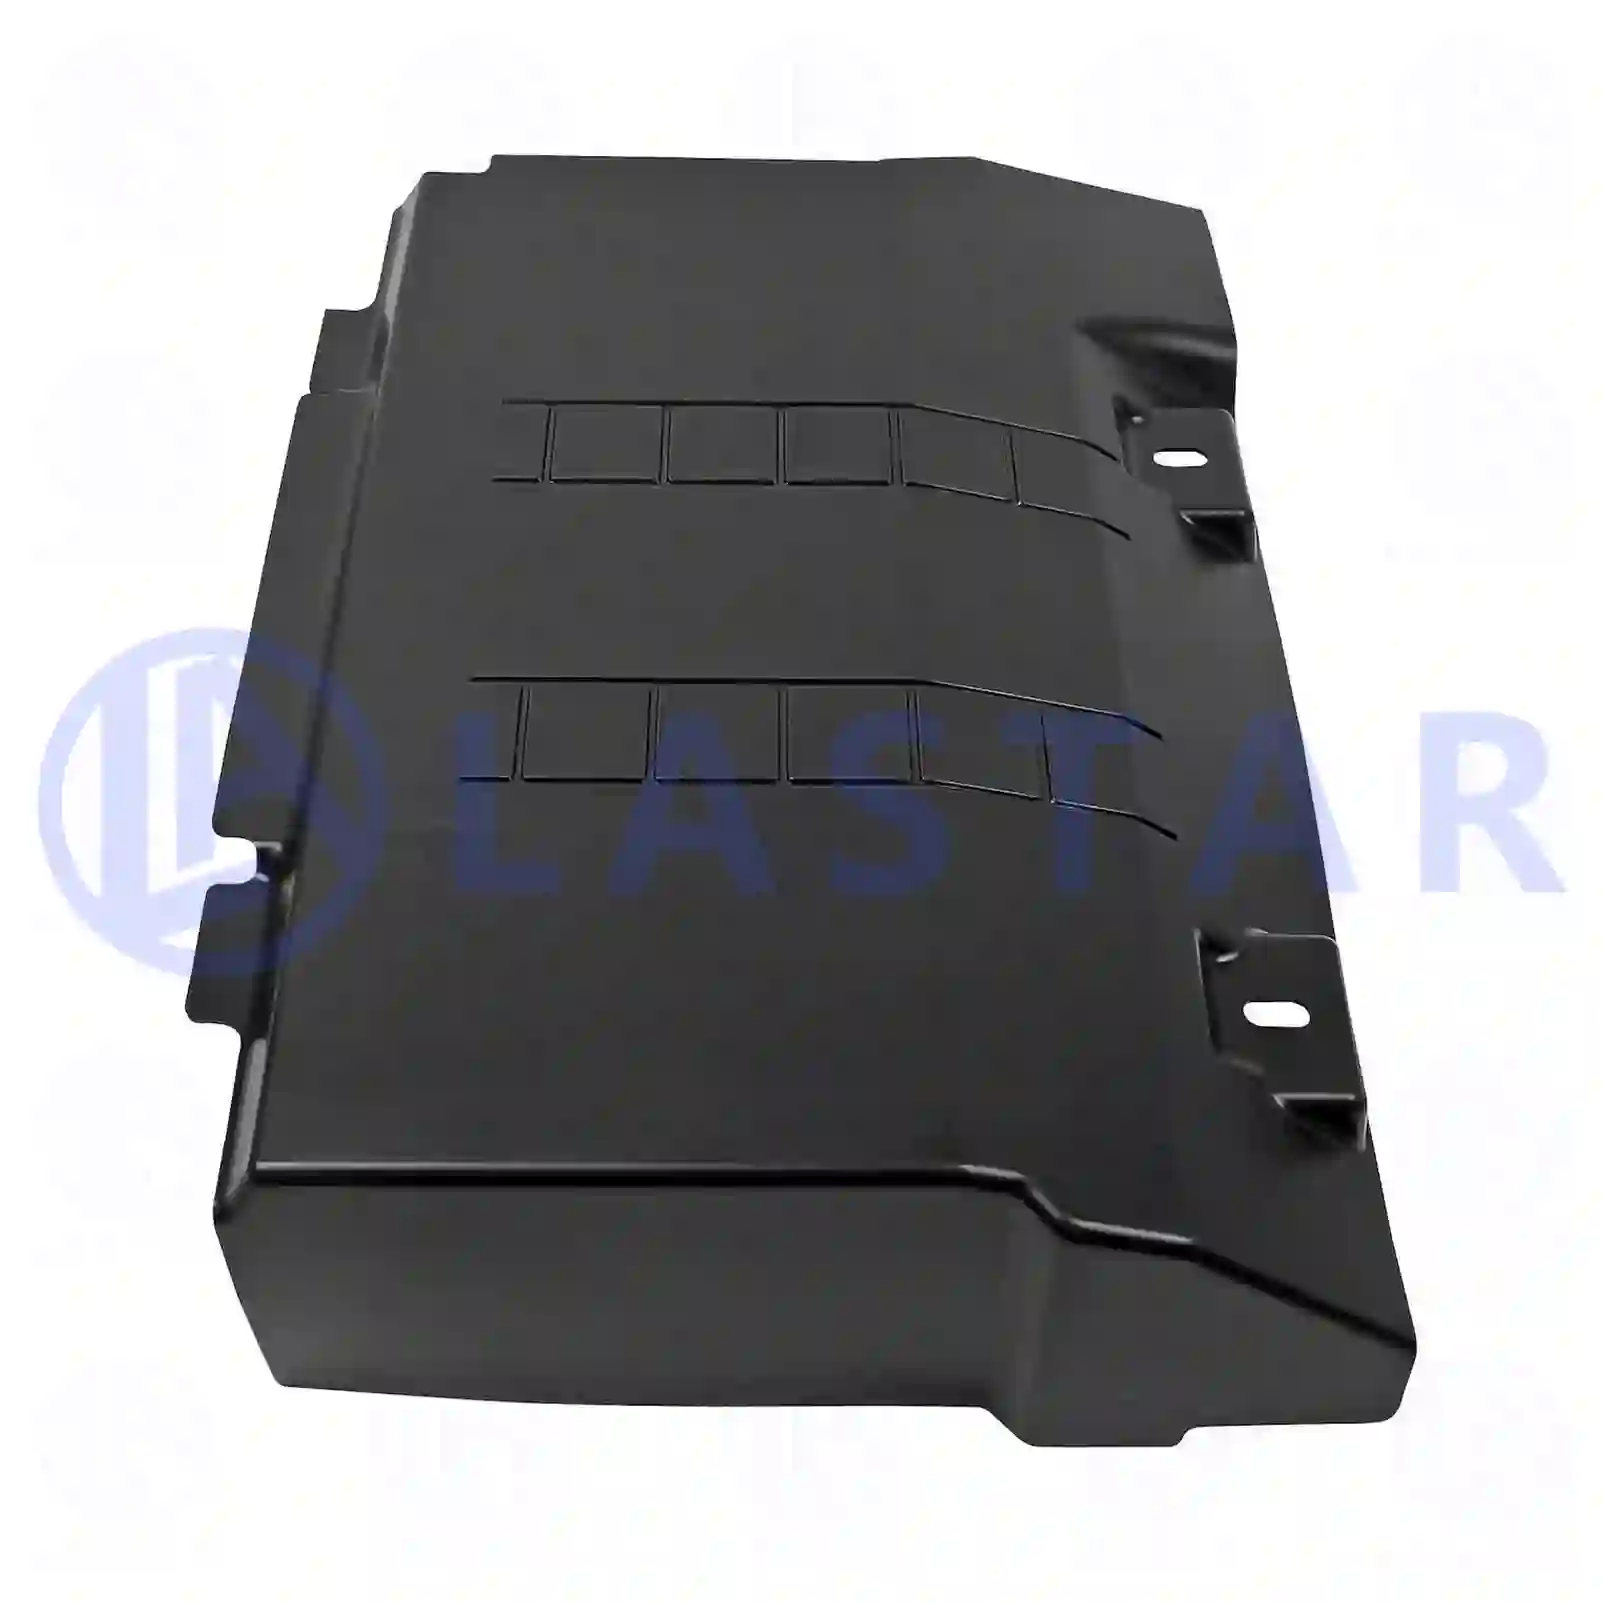 Battery cover, 77710079, #YOK ||  77710079 Lastar Spare Part | Truck Spare Parts, Auotomotive Spare Parts Battery cover, 77710079, #YOK ||  77710079 Lastar Spare Part | Truck Spare Parts, Auotomotive Spare Parts